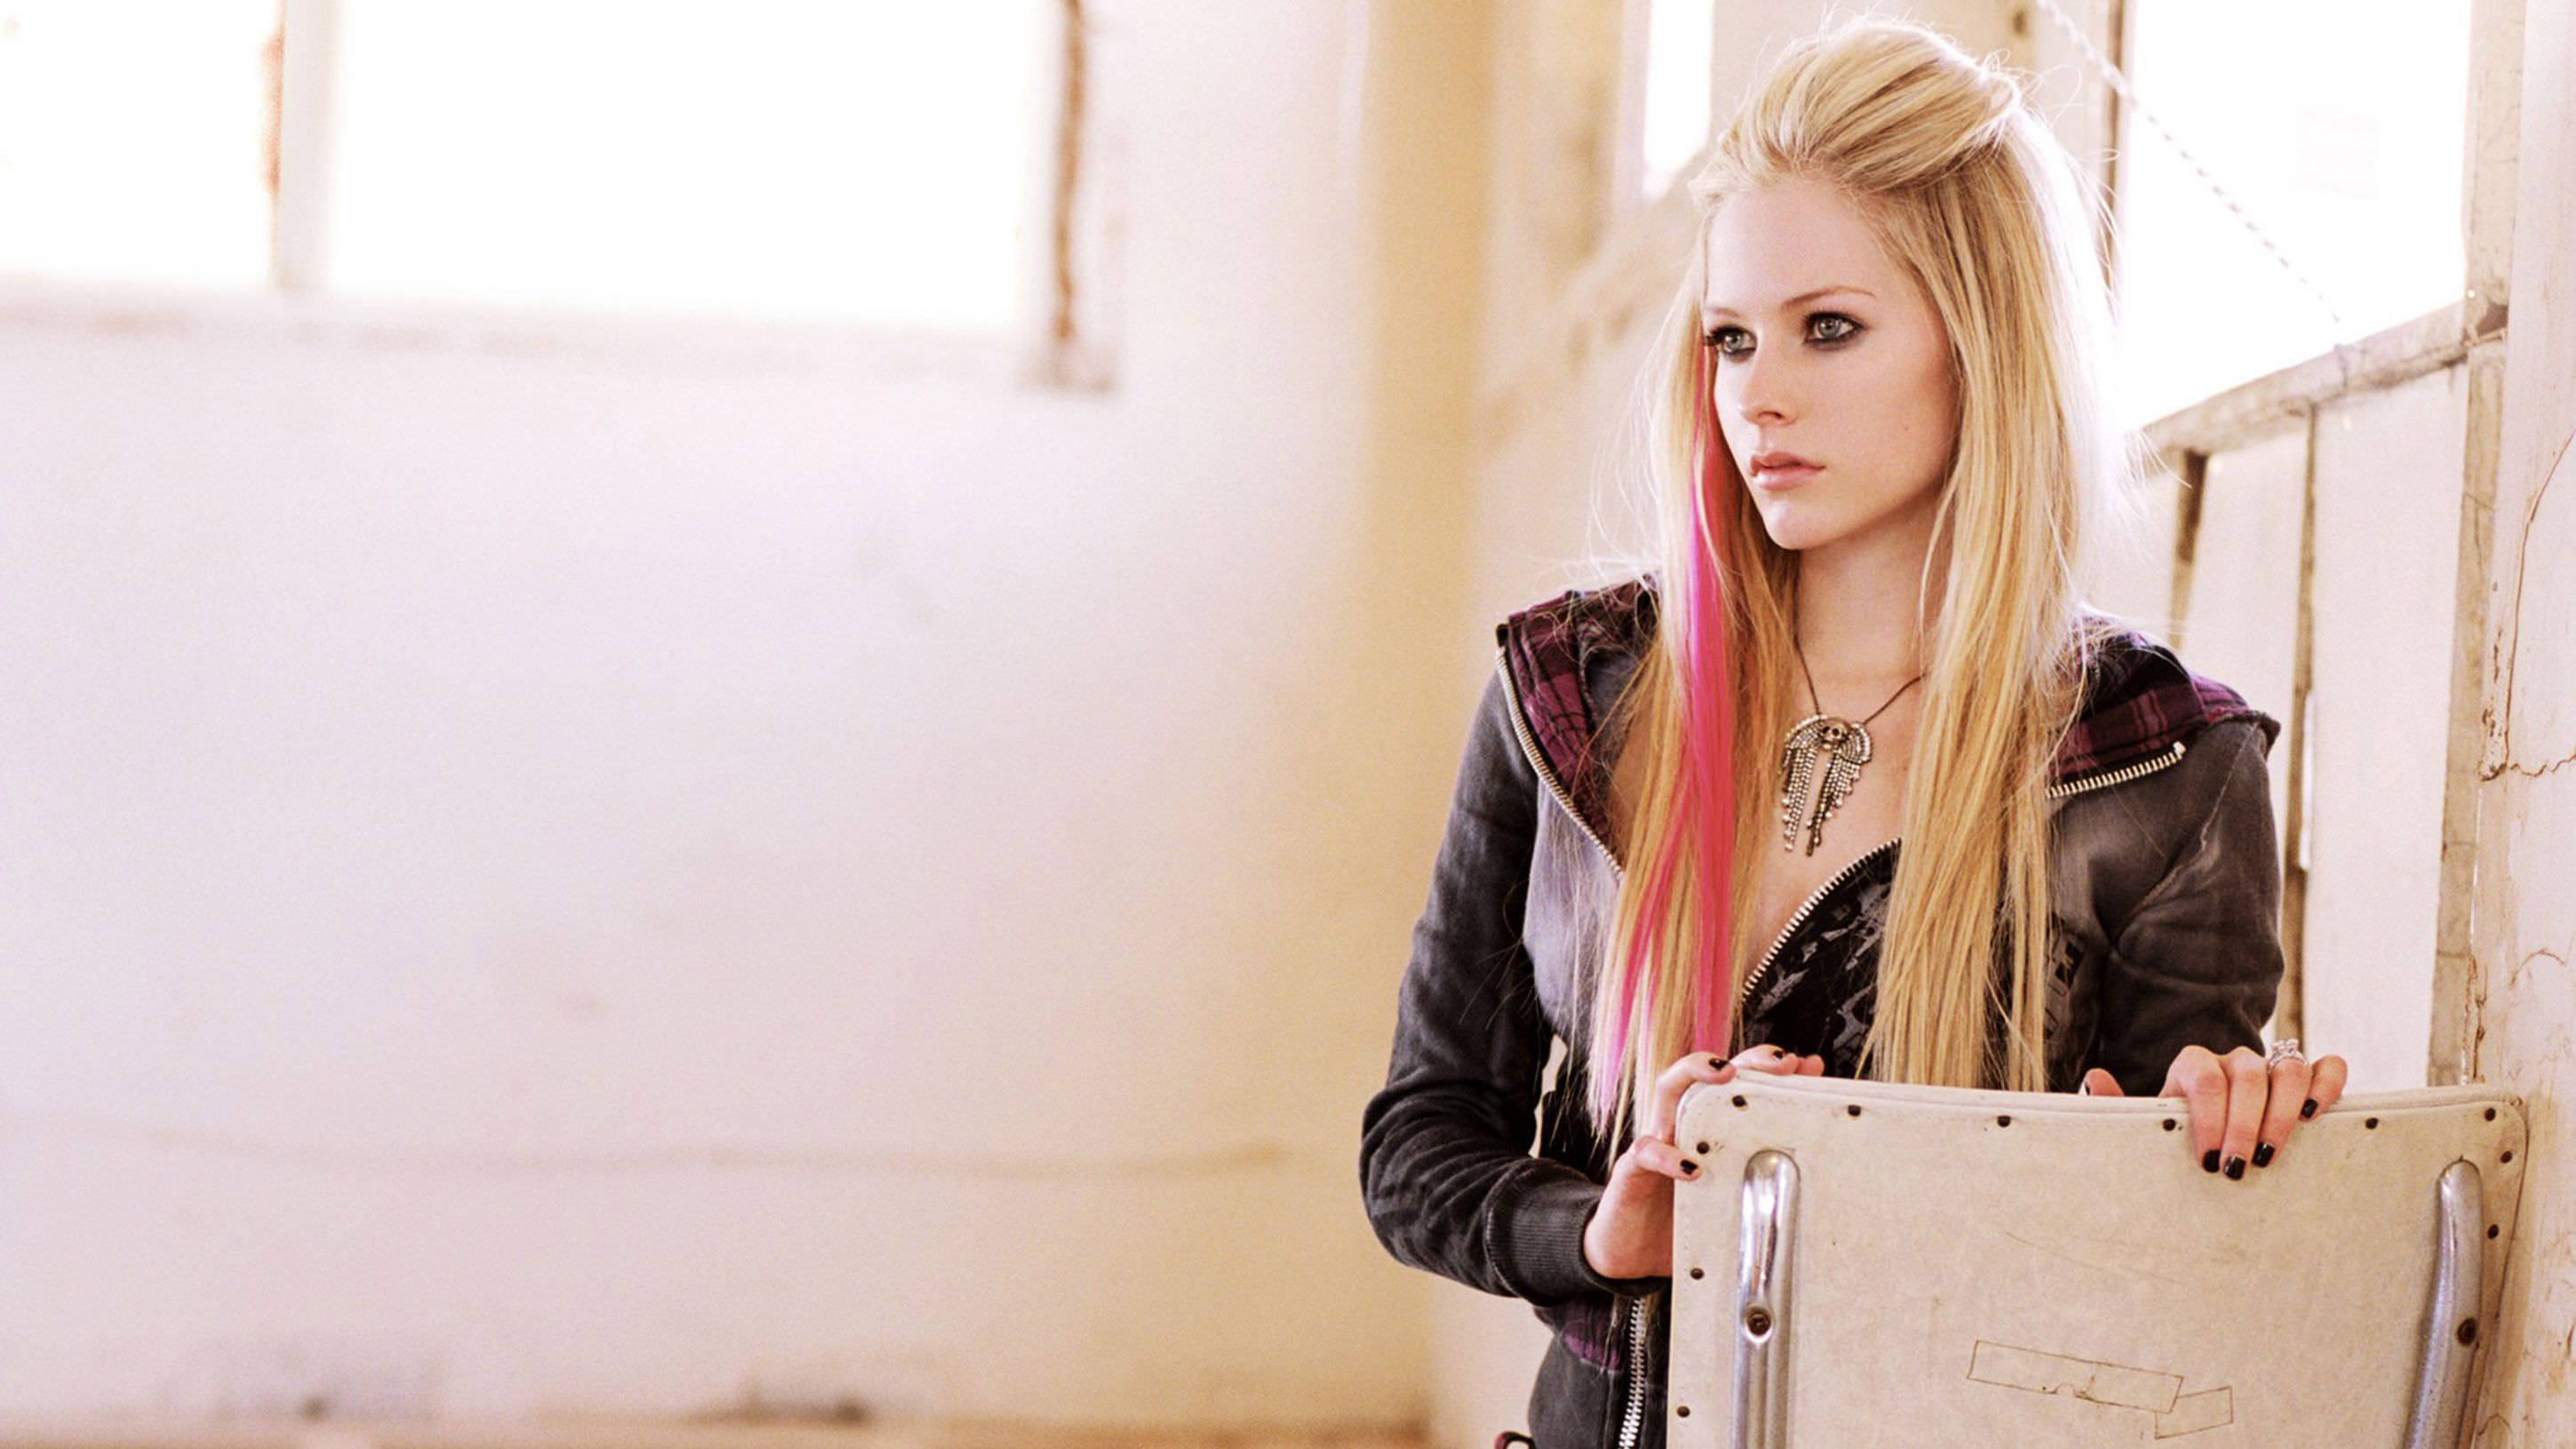 Avril Lavigne Hd Music 4k Wallpapers Images Backgrounds